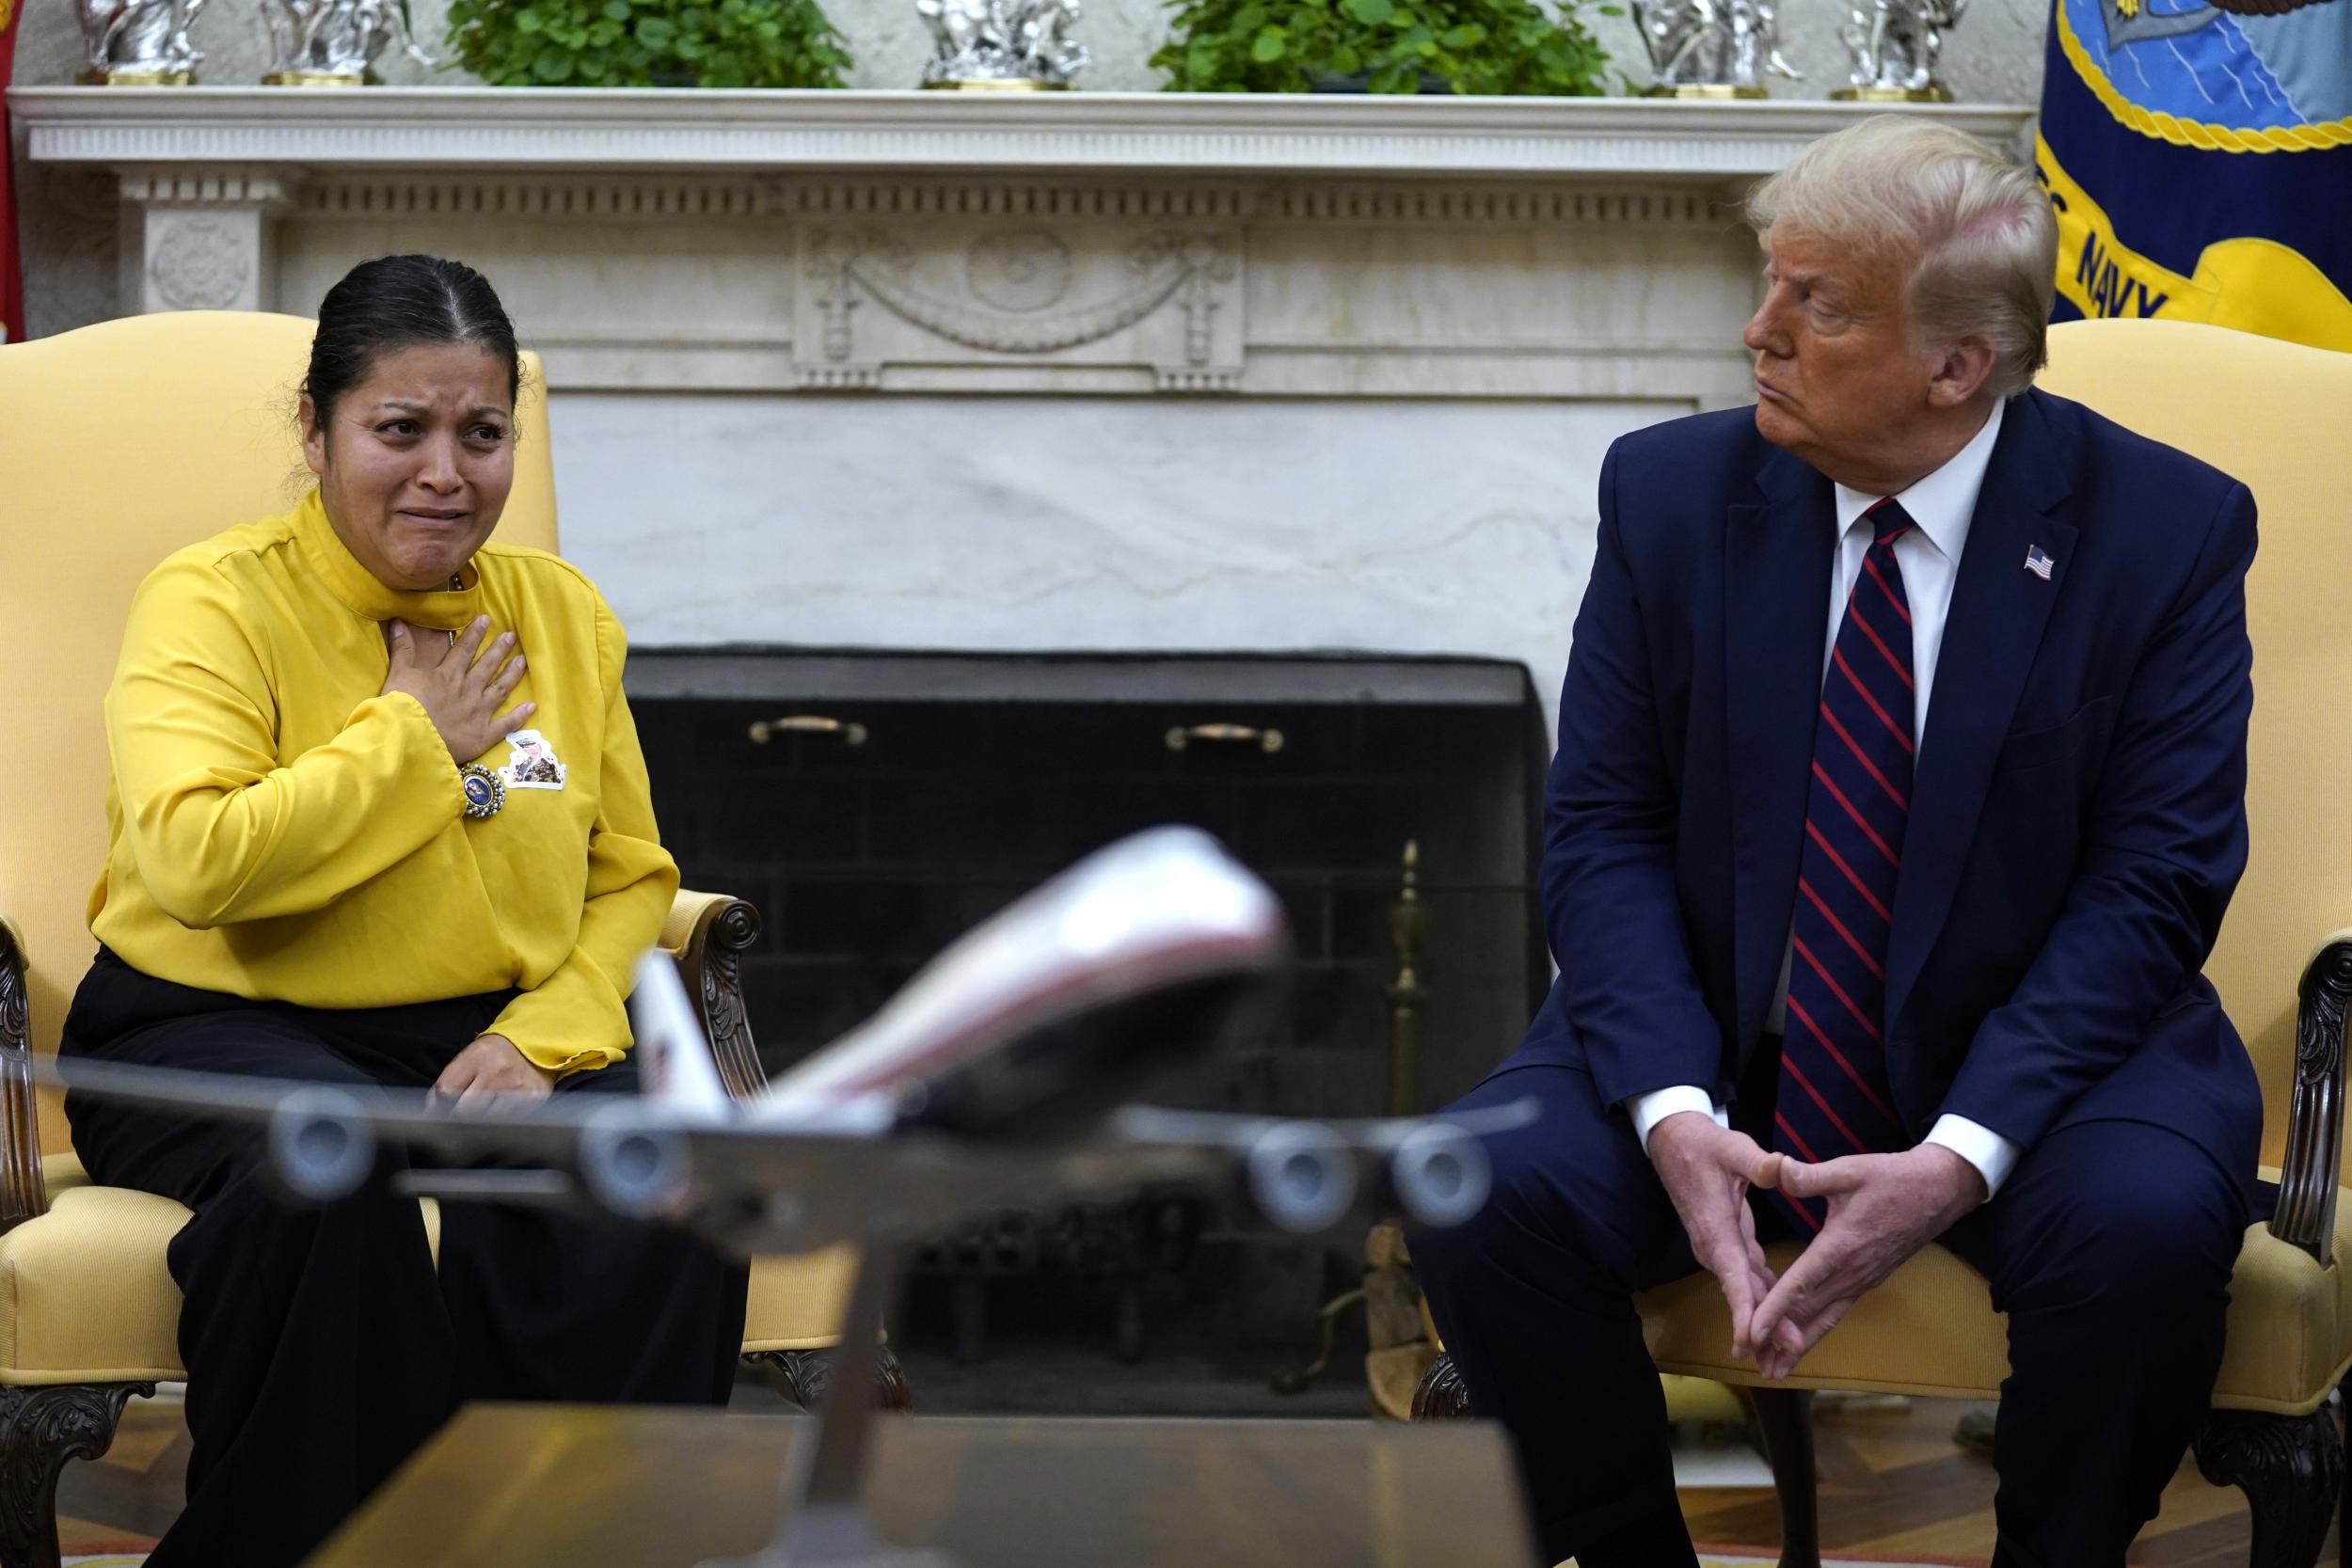 President Donald Trump meets with the family of slain Army Specialist Vanessa Guillen in the Oval Office of the White House on Thursday, 30 July, 2020